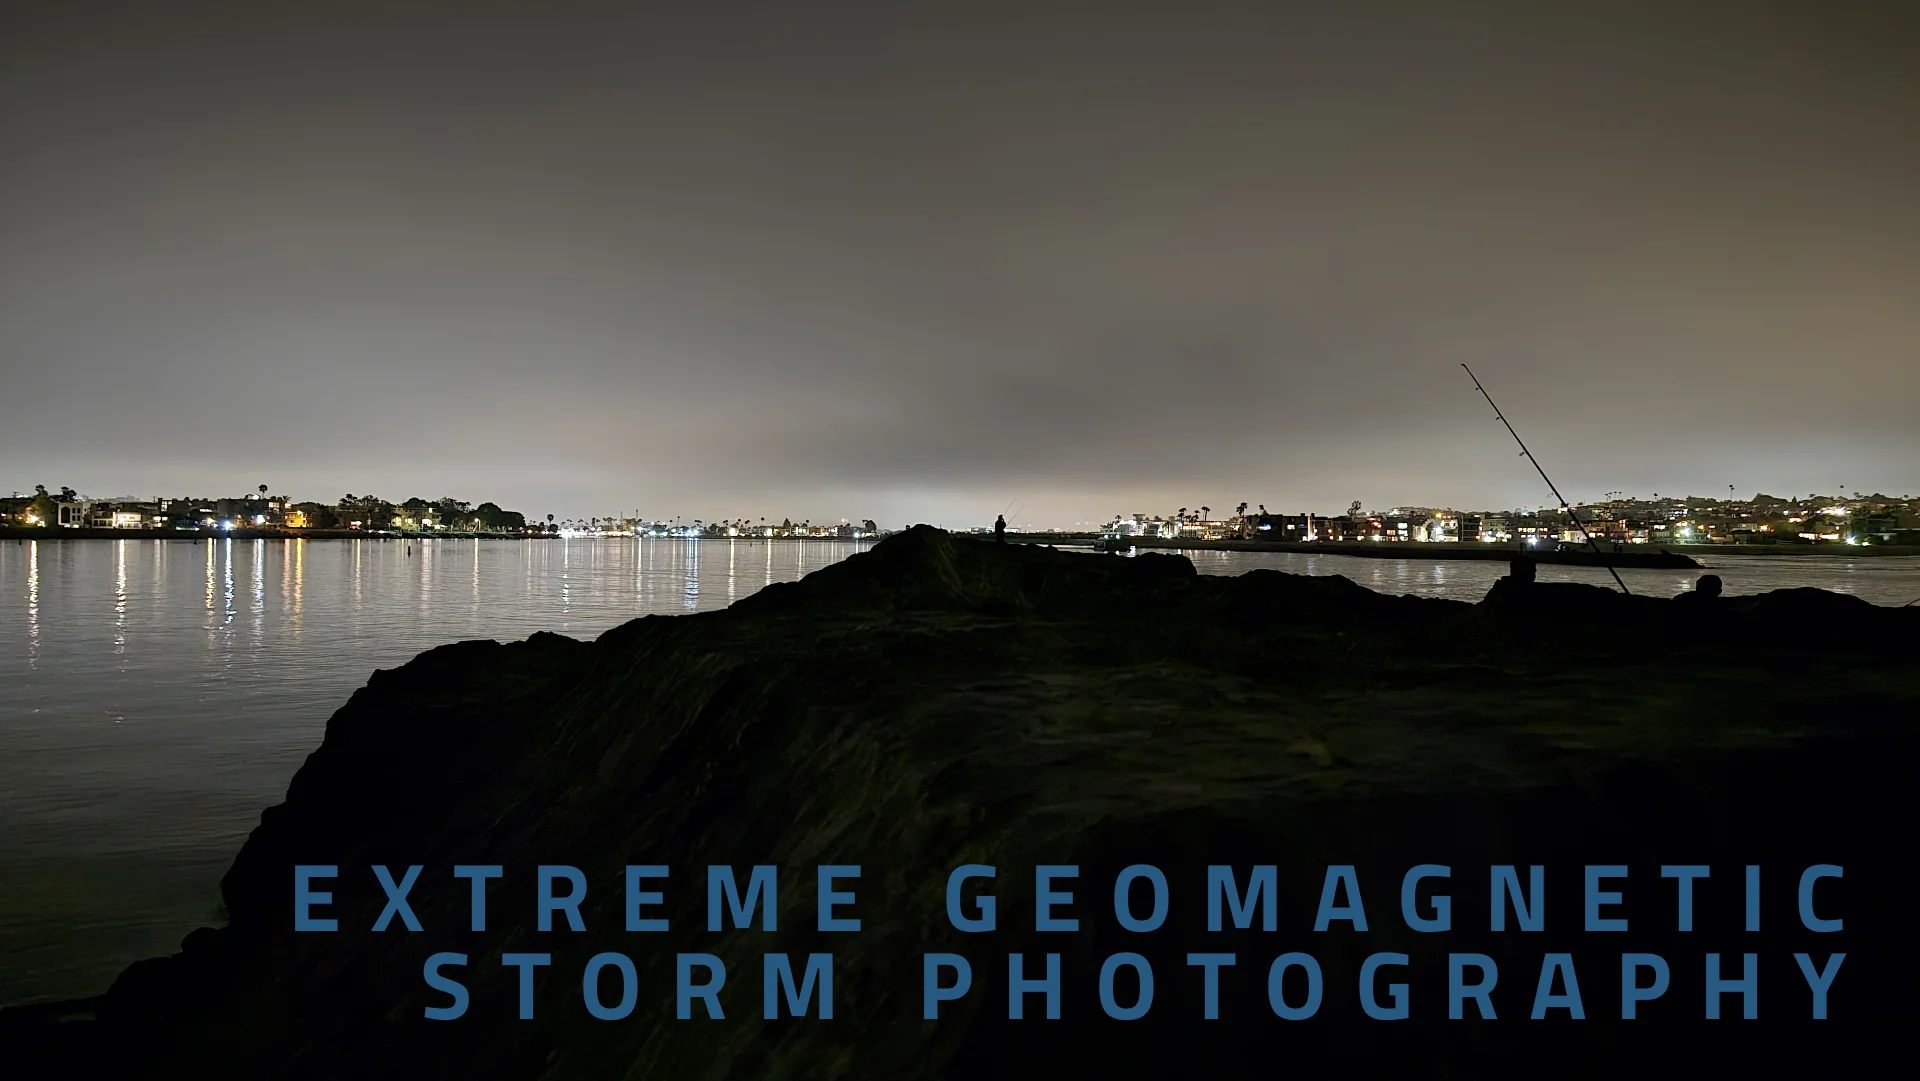 Extreme Geomagnetic Storm Photography